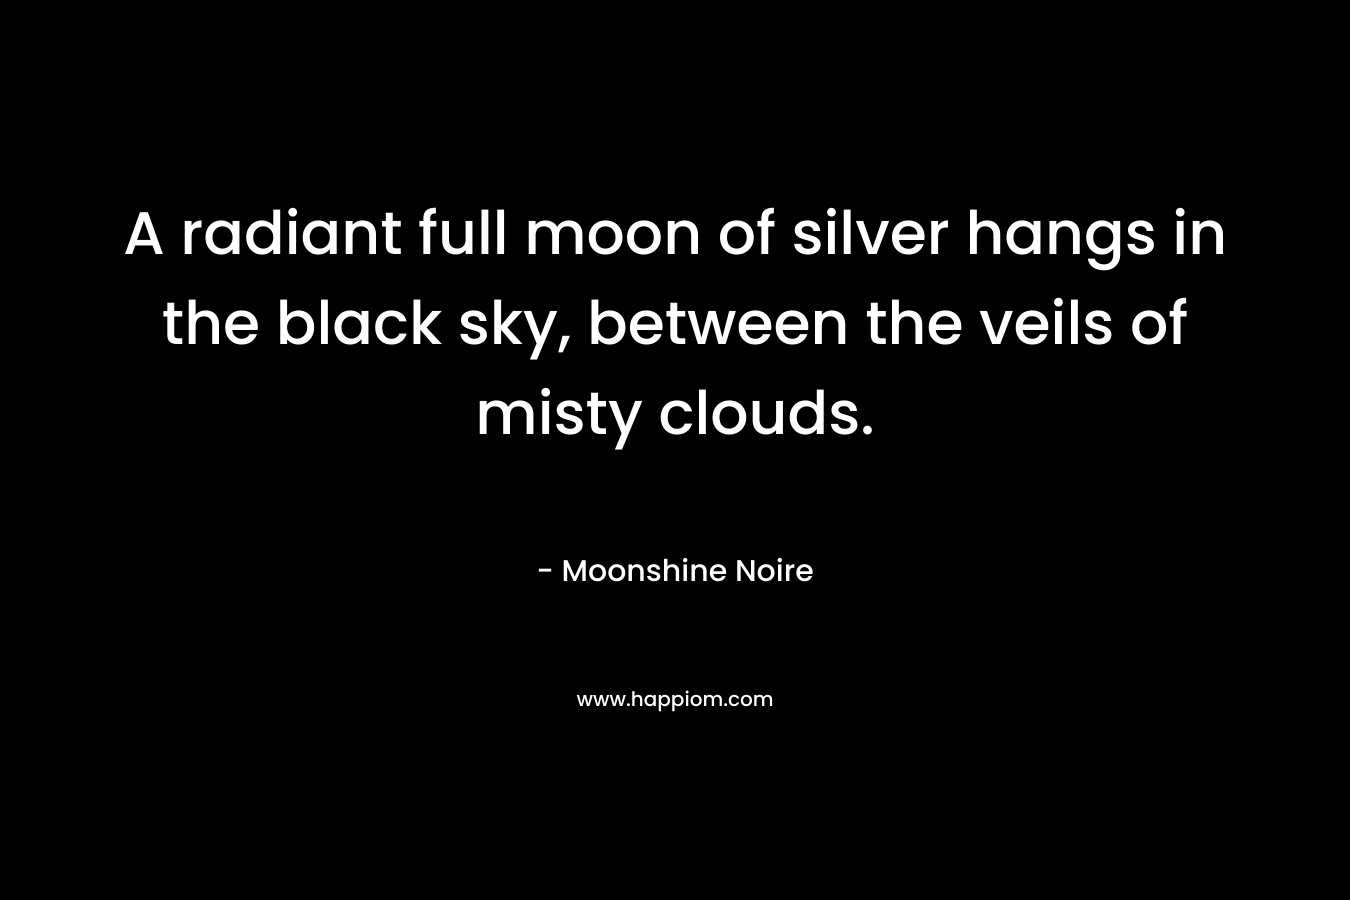 A radiant full moon of silver hangs in the black sky, between the veils of misty clouds. – Moonshine Noire